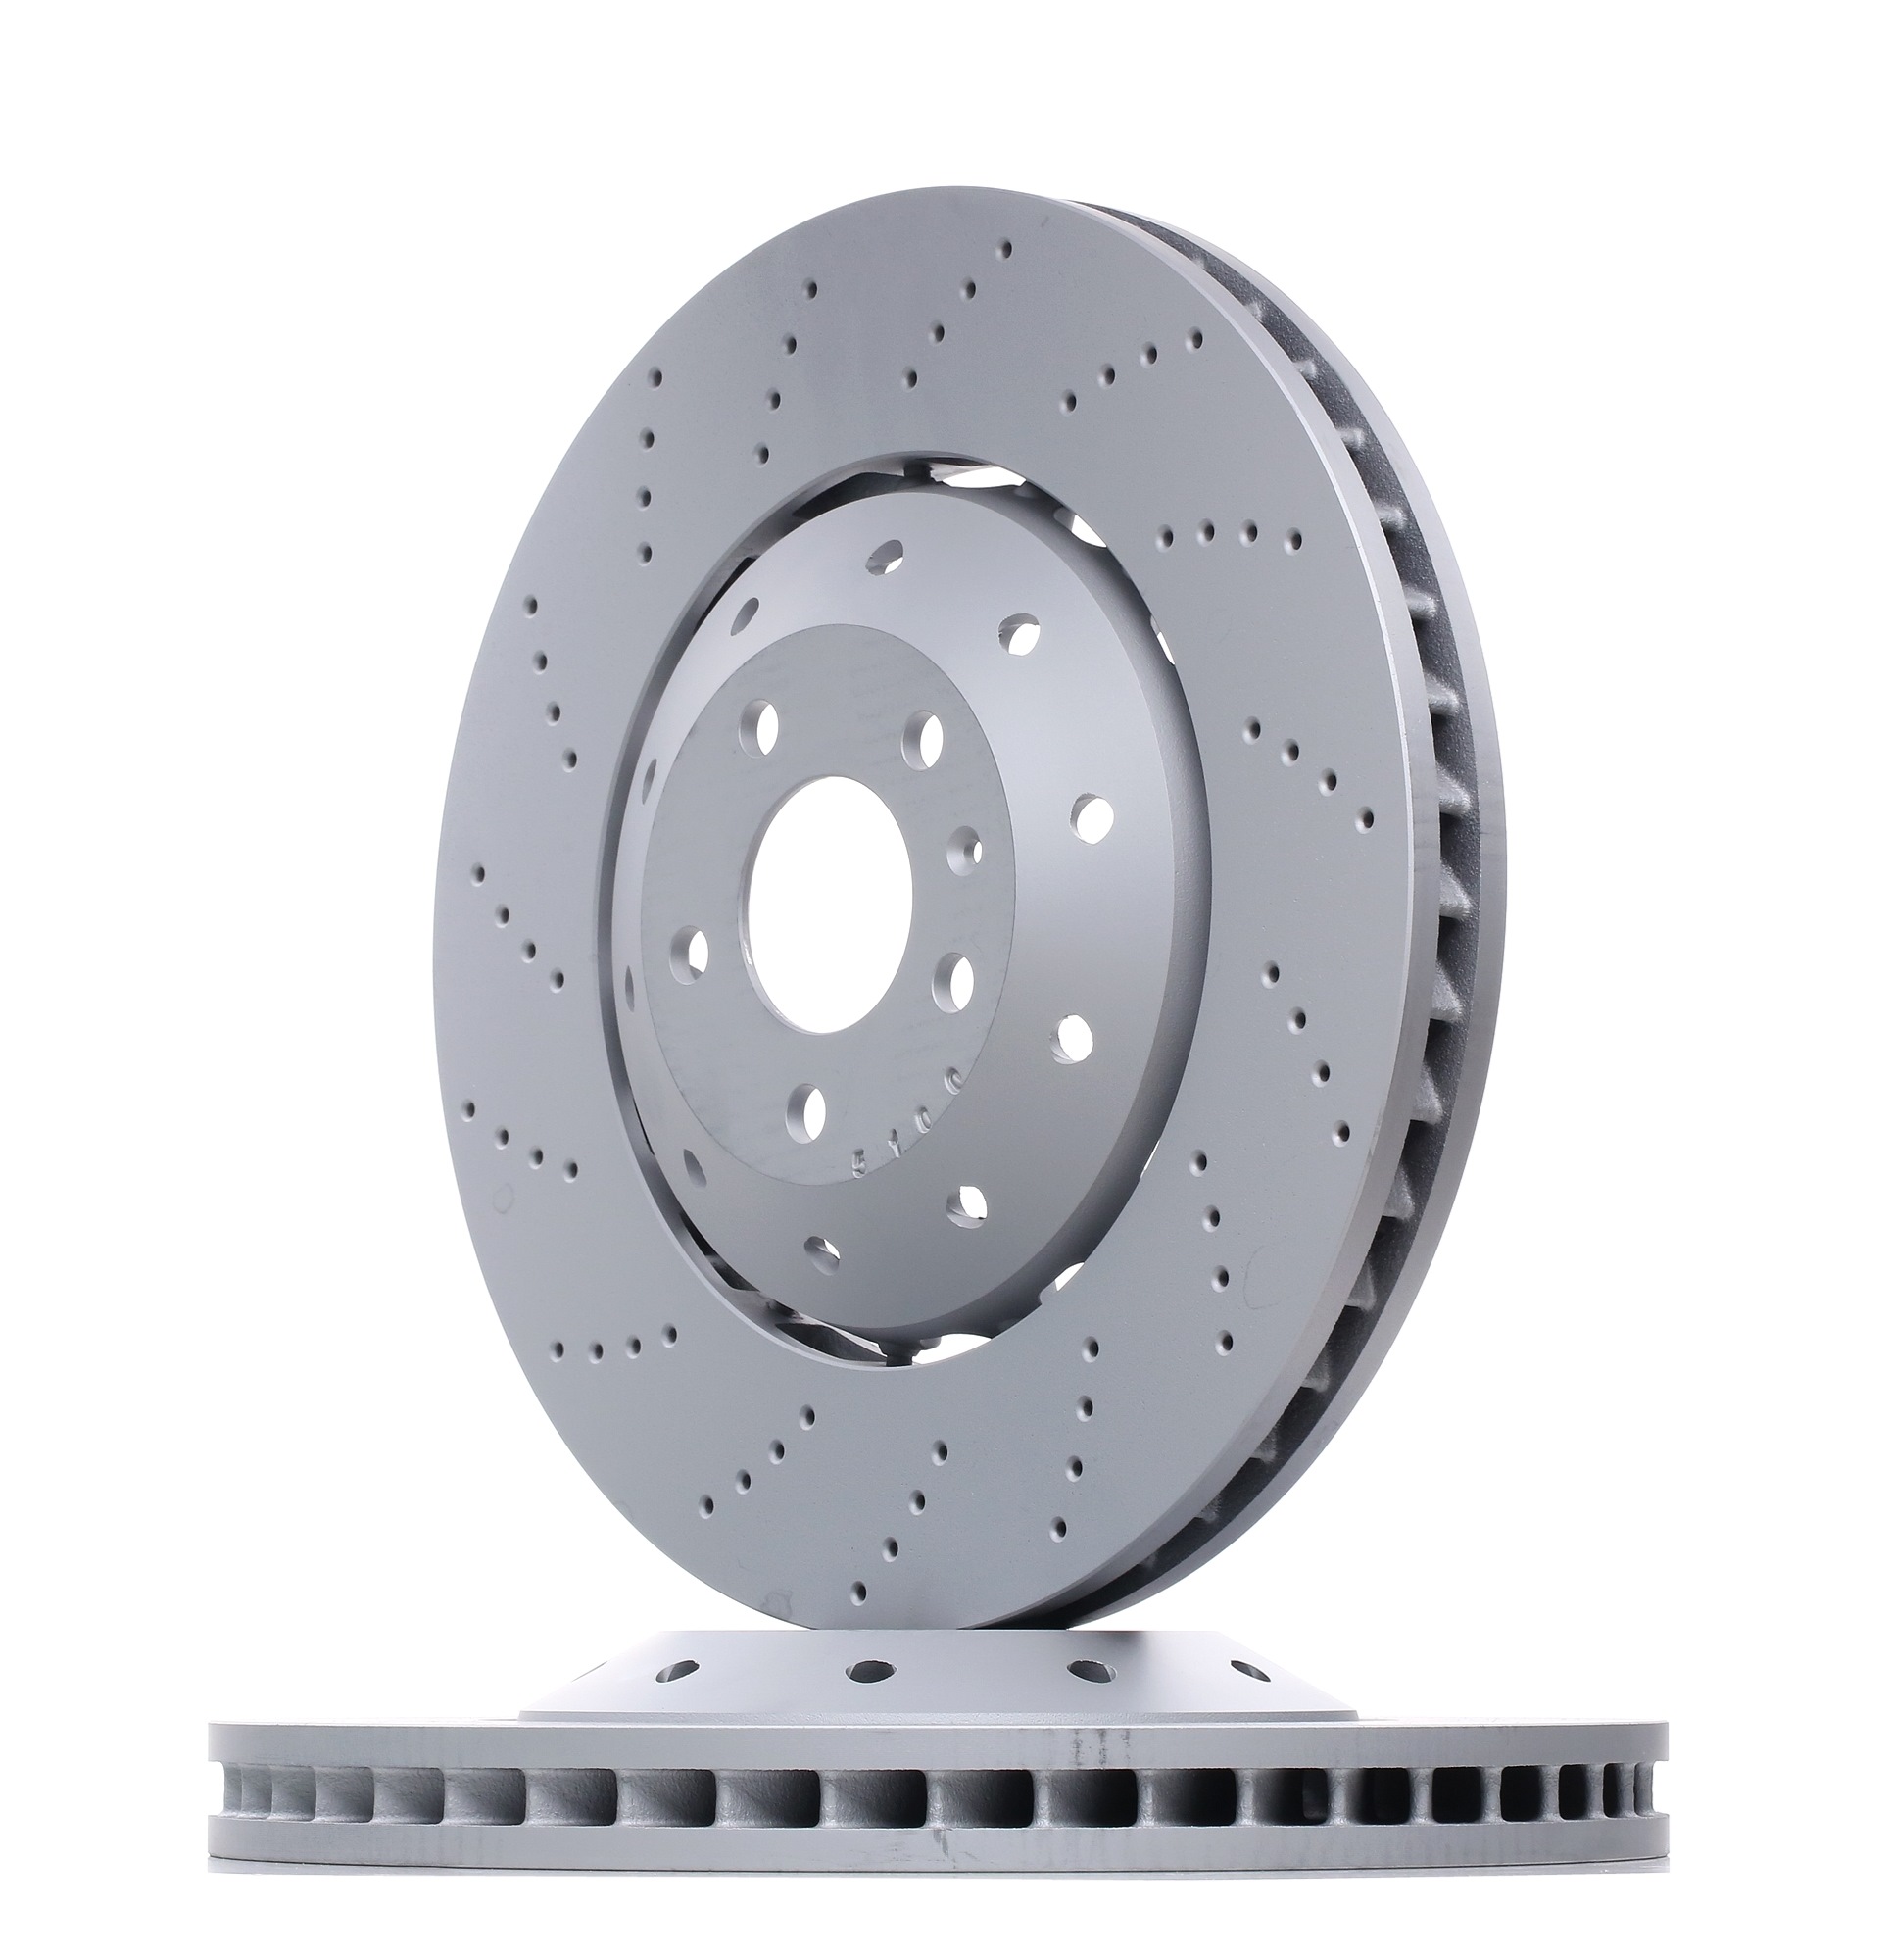 ZIMMERMANN FORMULA Z COAT Z 100.3369.70 Brake disc 390x36mm, 6/5, 5x112, Vented, Perforated, two-part brake disc, Coated, Alloyed/High-carbon